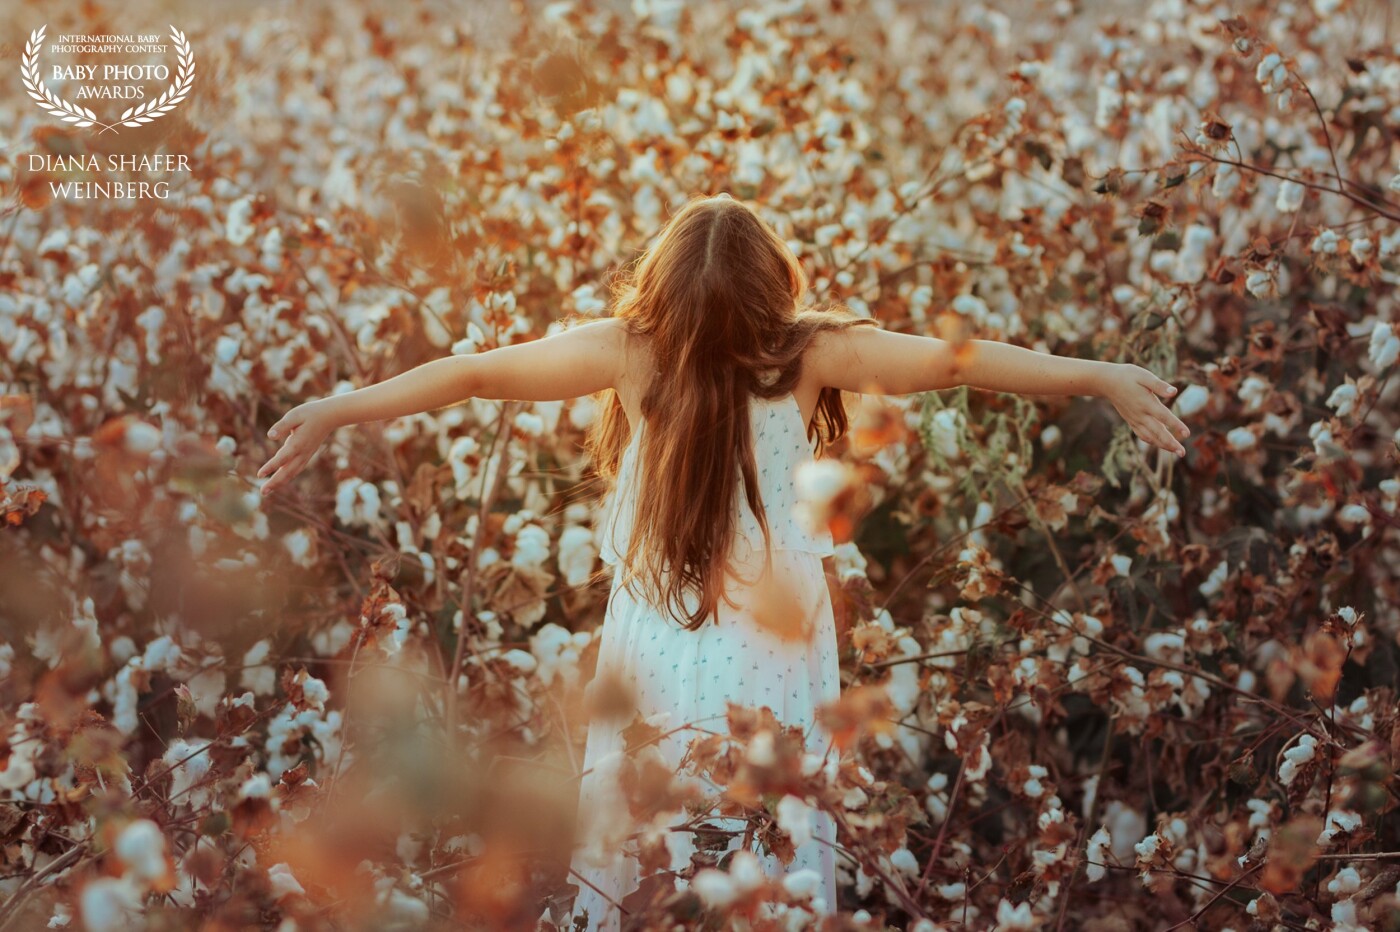 Sometimes you have to let go. Breathe. Live in the moment. See the beauty in nature. See the beauty in our world. You can do it all in the middle of a cotton field.